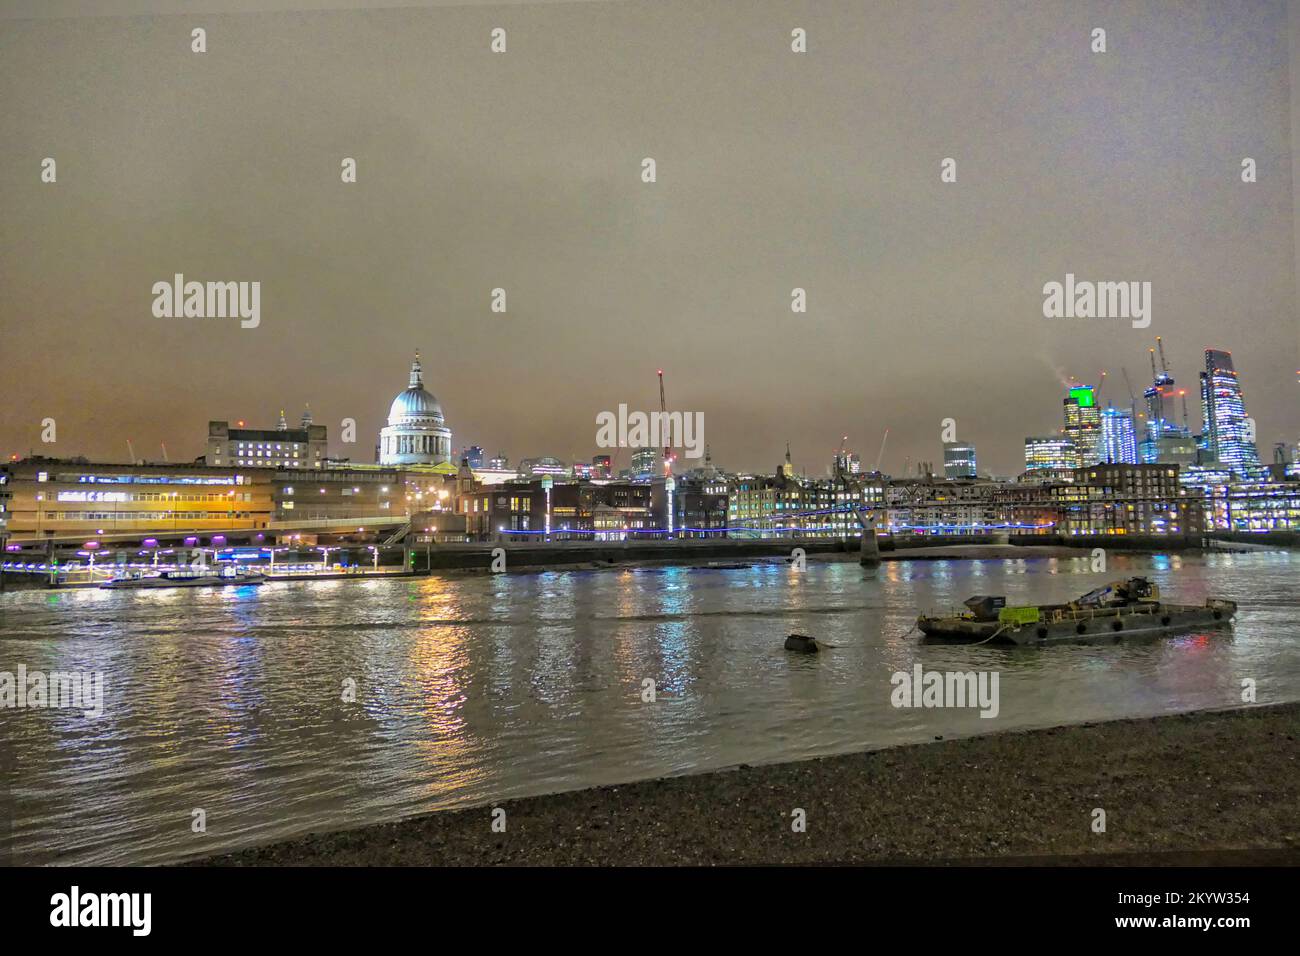 London skyline with  the River Thames and The St Paul's Cathedral at night Stock Photo